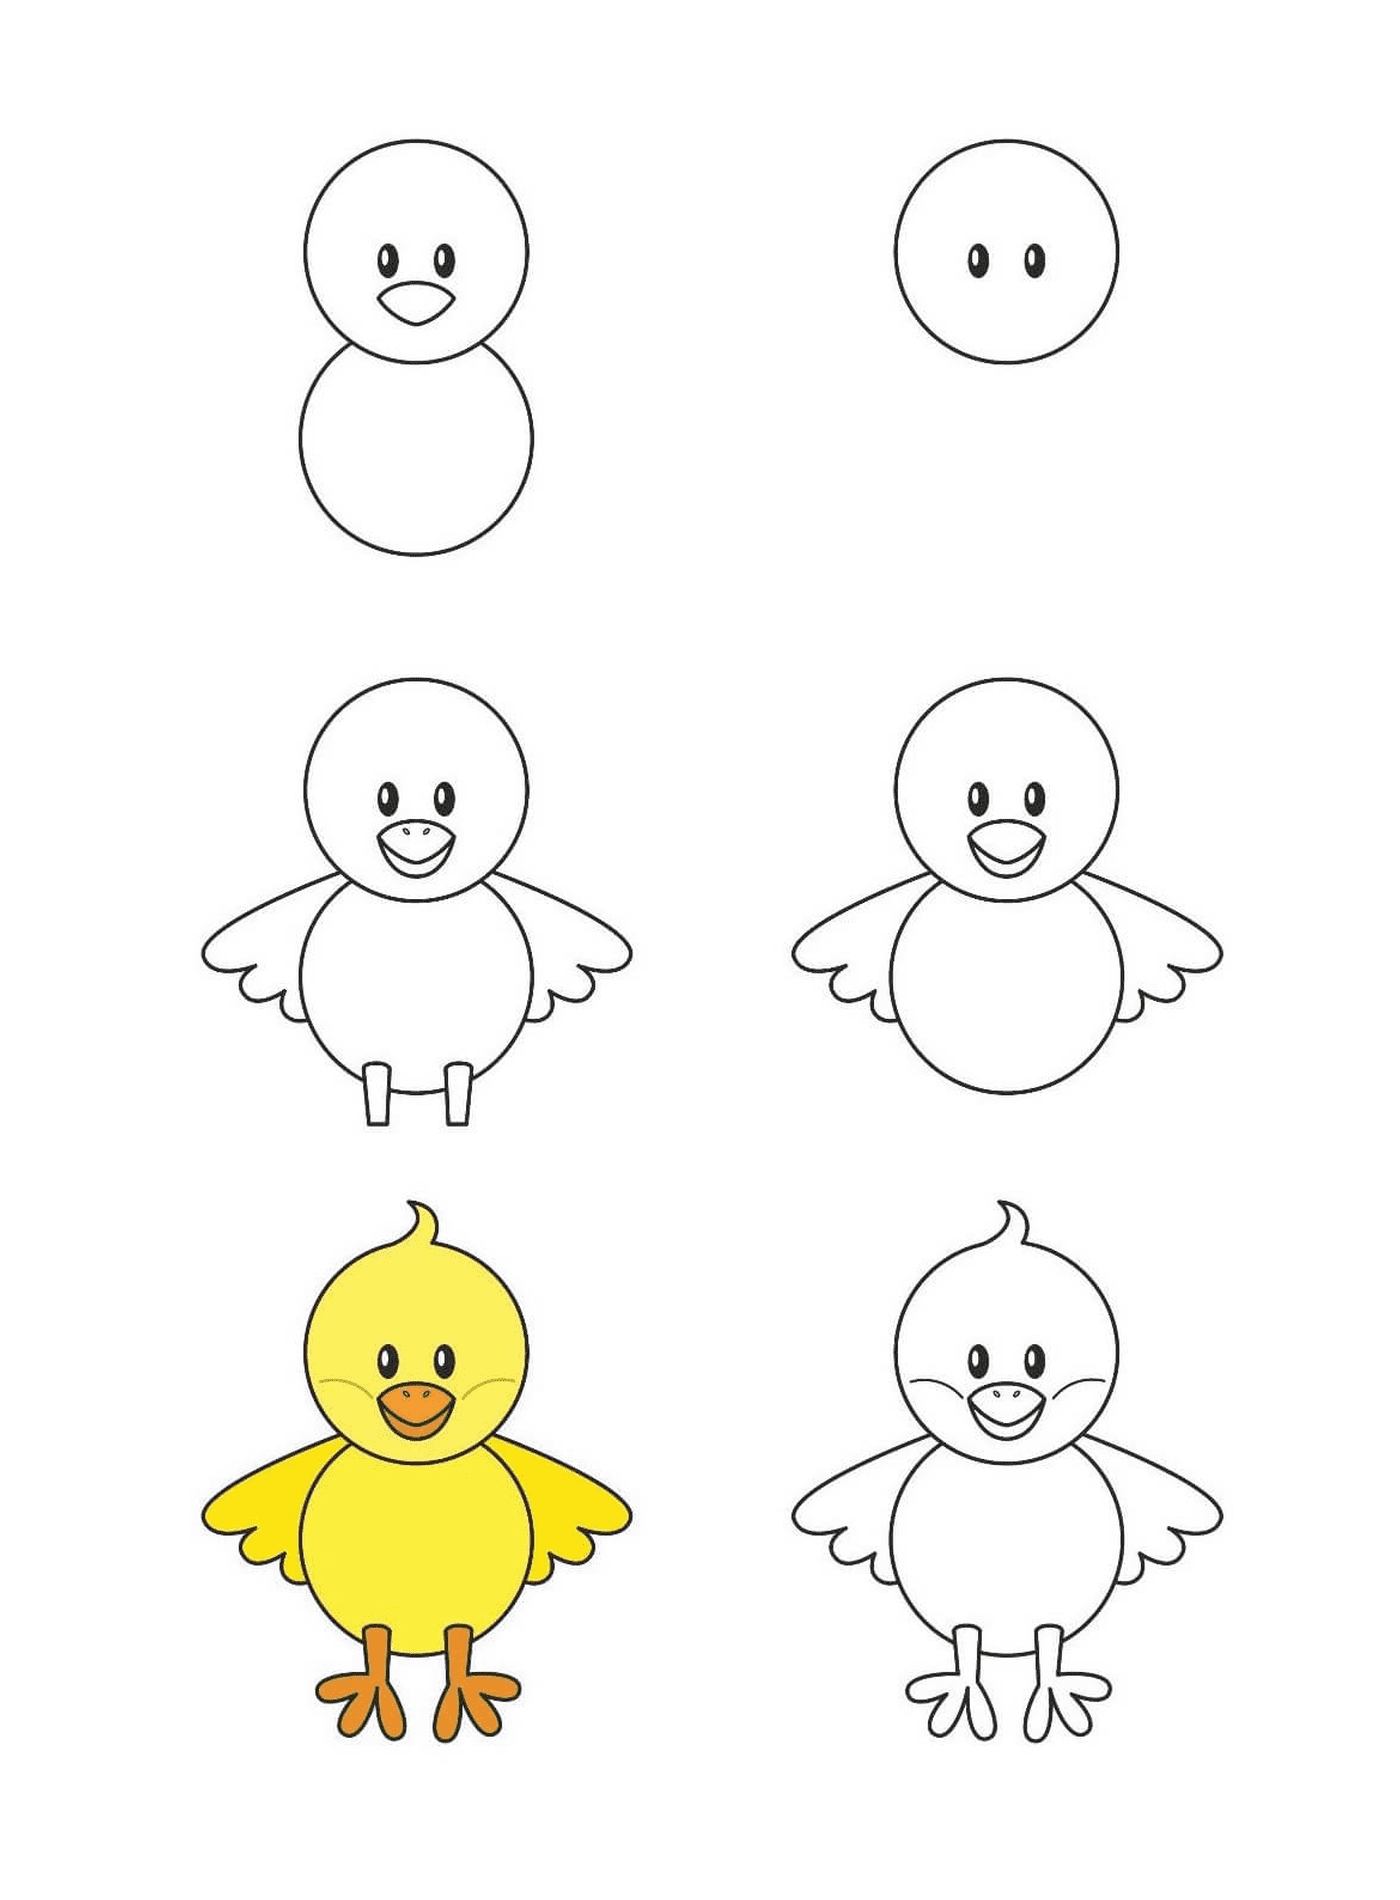  Duck drawing stage stage 